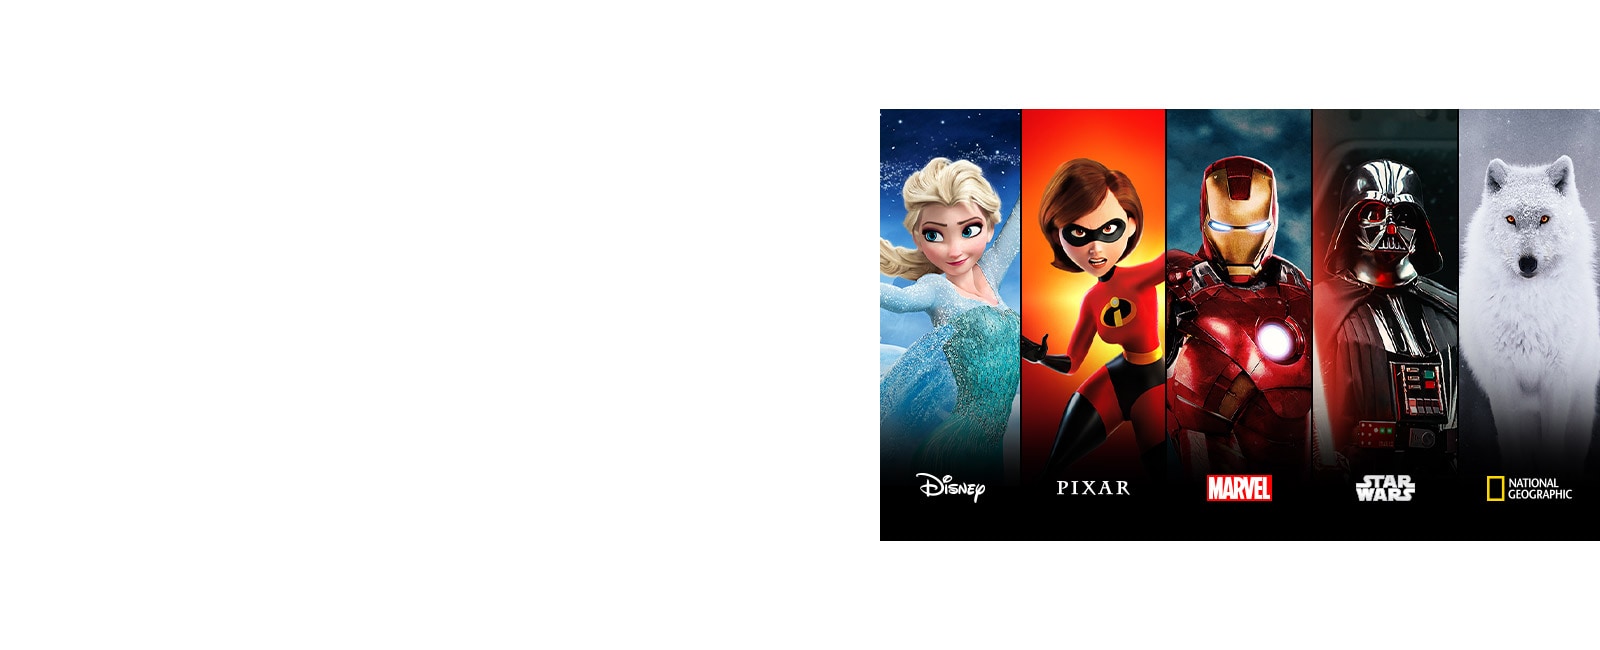 Disney Moana, Pixar Incredibles, Marvel Iron Man, Star Wars, and National Geographic title cards